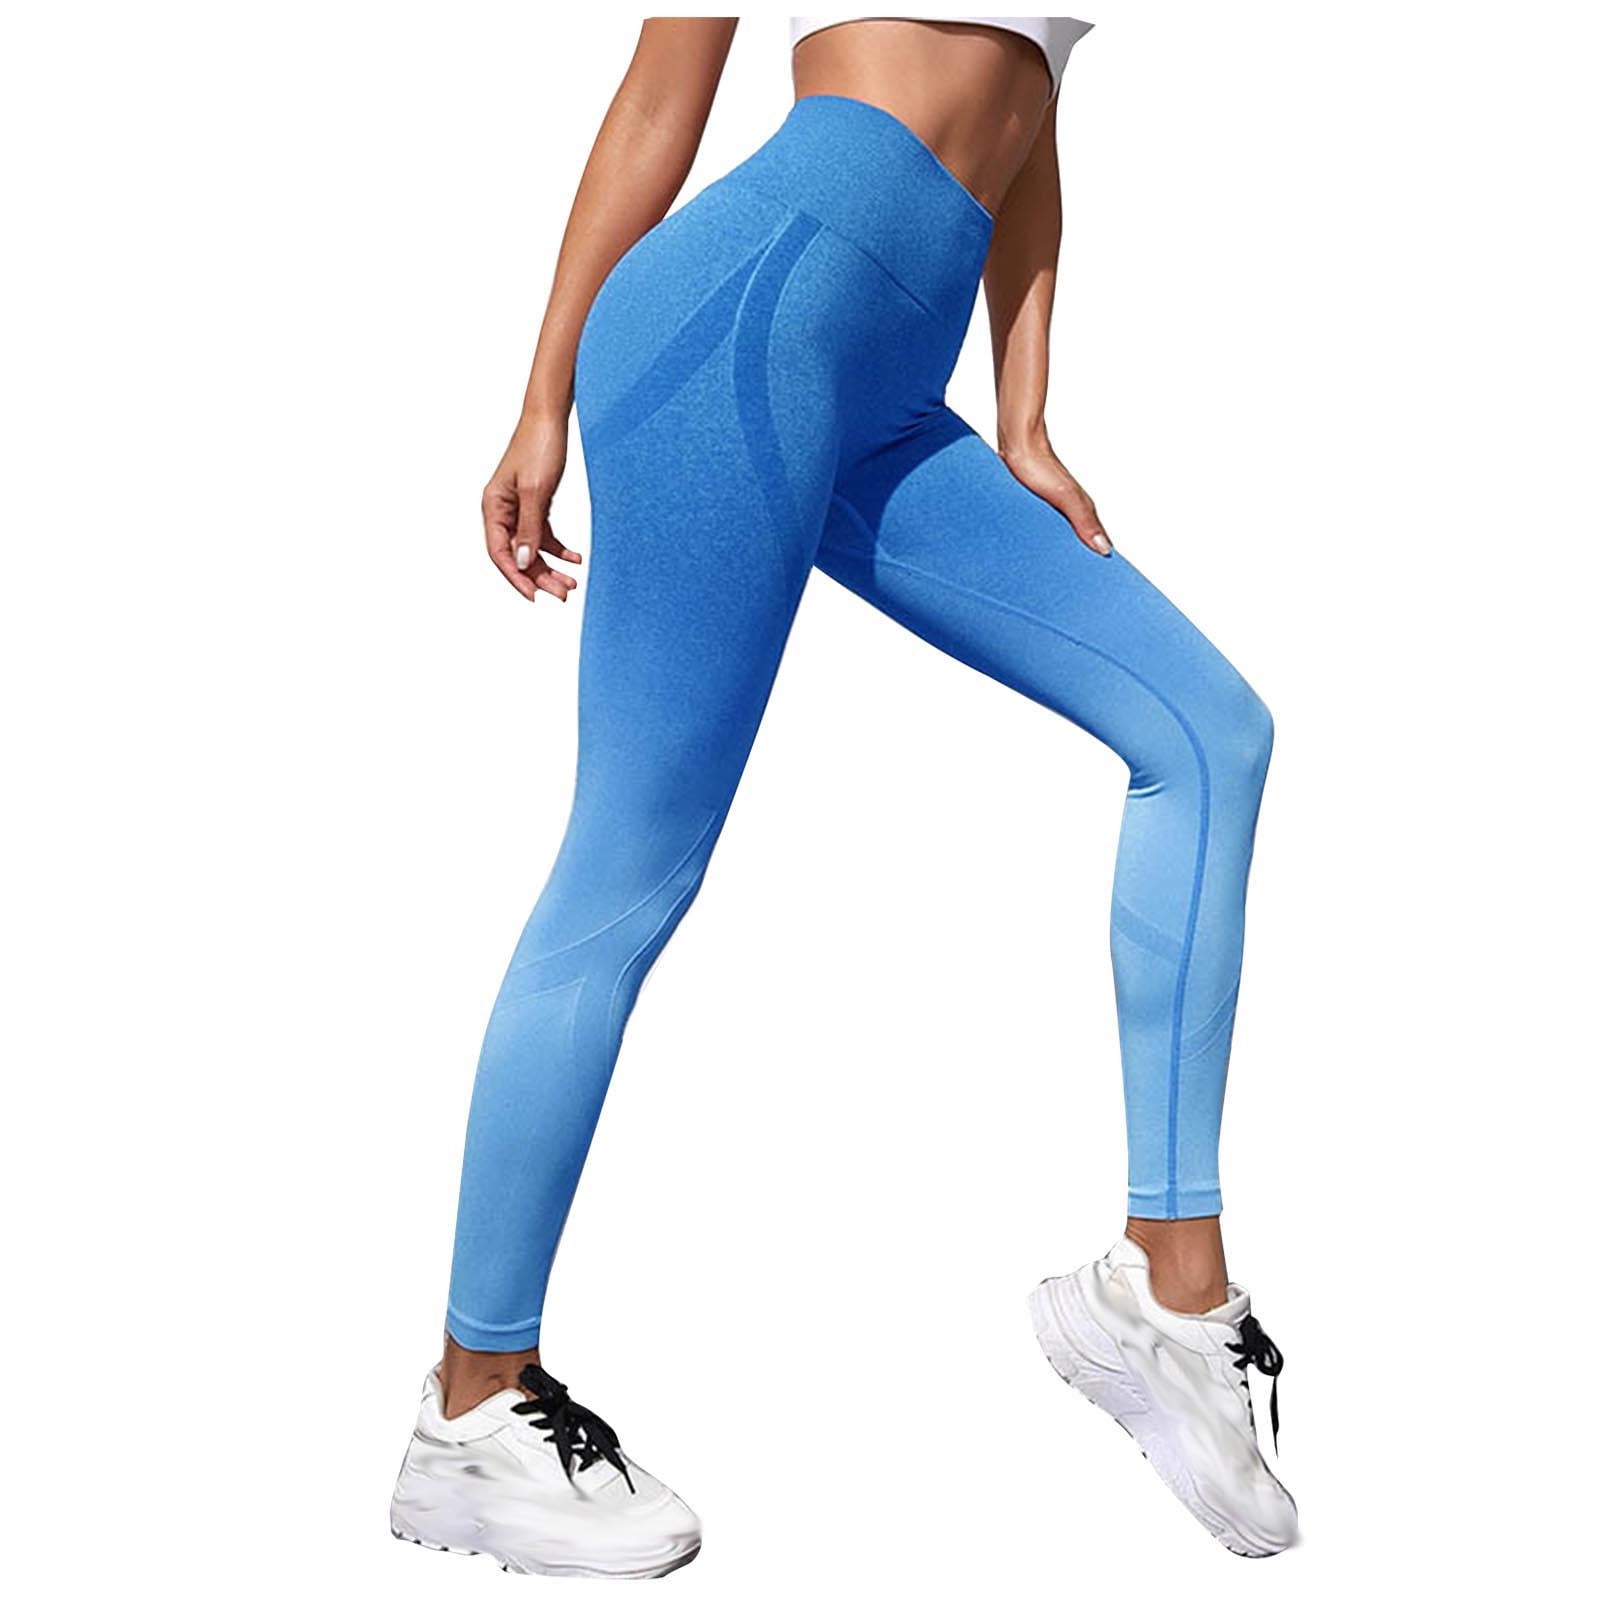 Hfyihgf High Waisted Leggings for Women Gradient Color Comfy Tummy Control  Slimming Yoga Pants Workout Running Tights Trousers(Light Blue,S) 